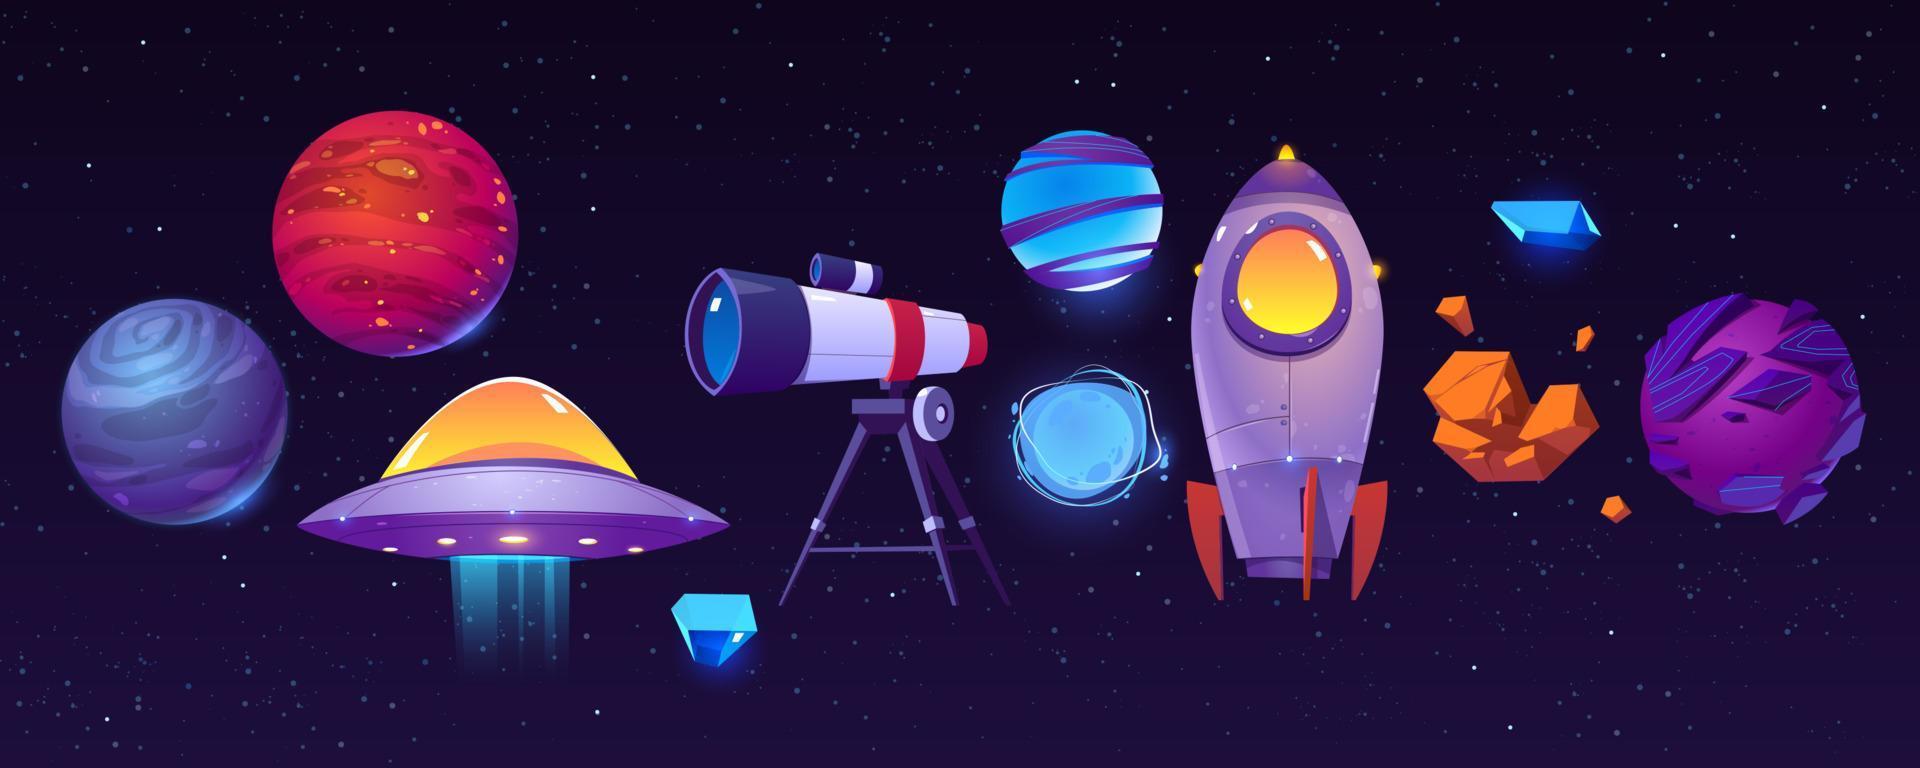 Space exploring icons, planets, rocket, telescope vector